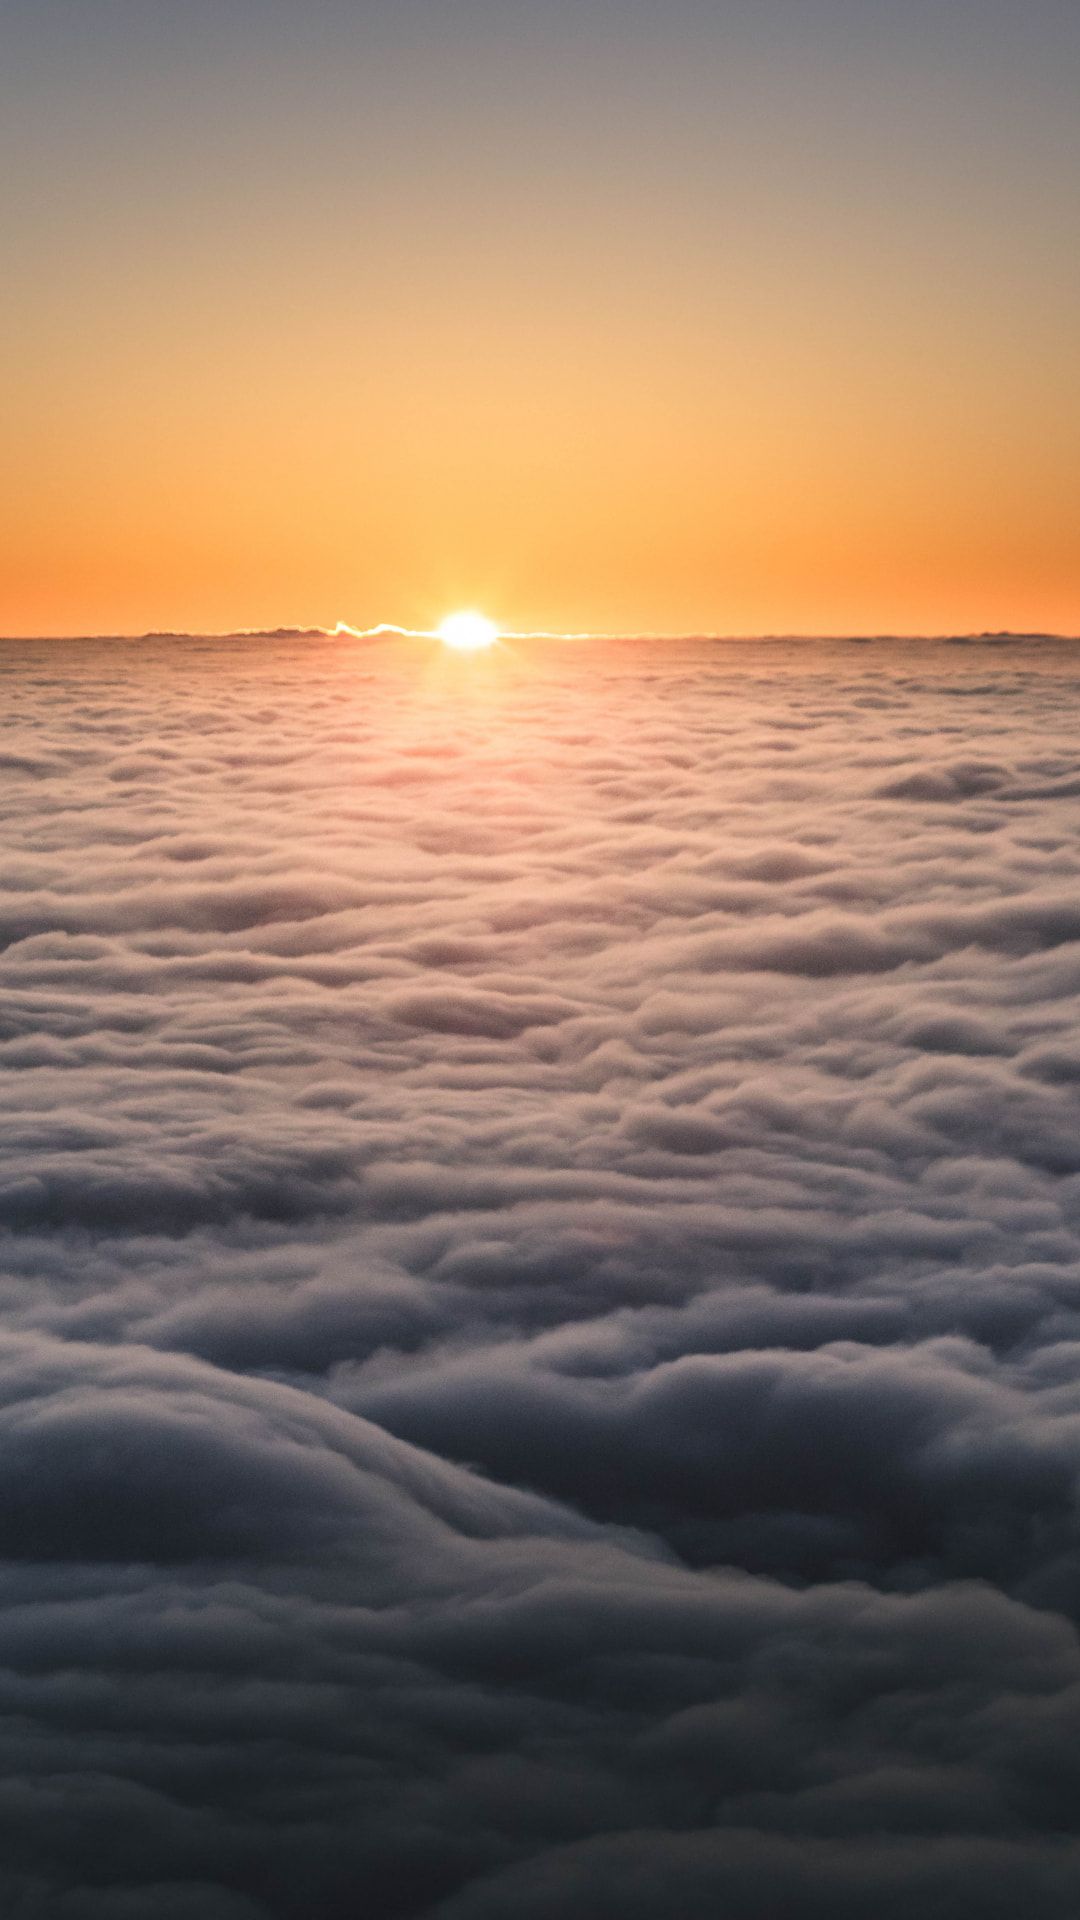 sunset above clouds